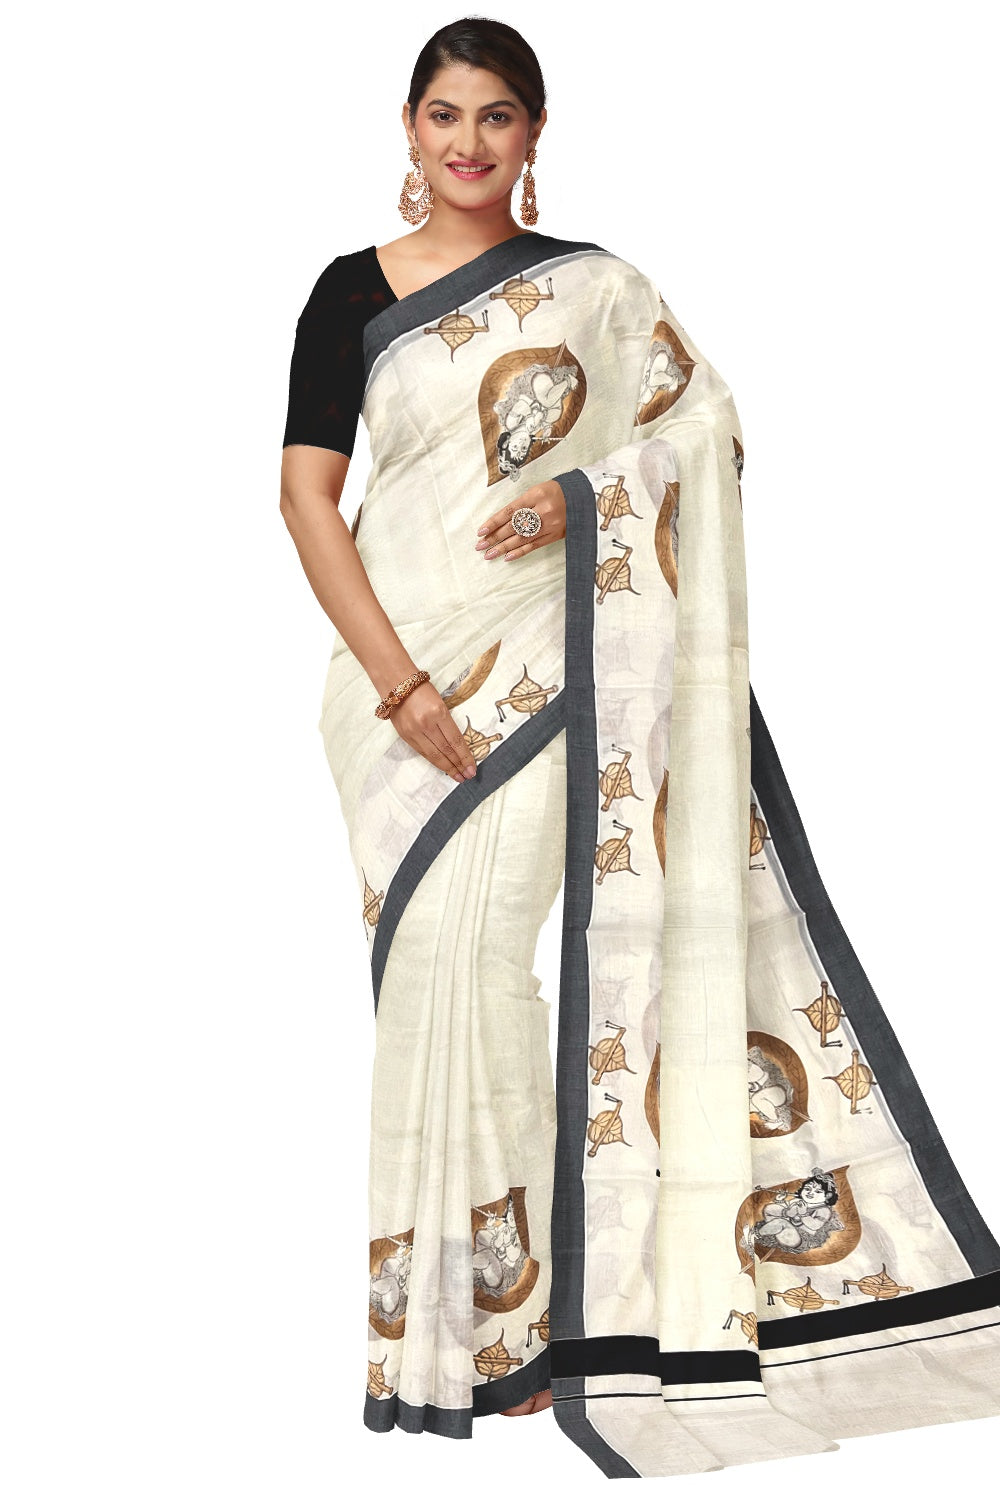 Kerala Pure Cotton Saree with Mural Printed Baby Krishna on Leaf Design and Black Border